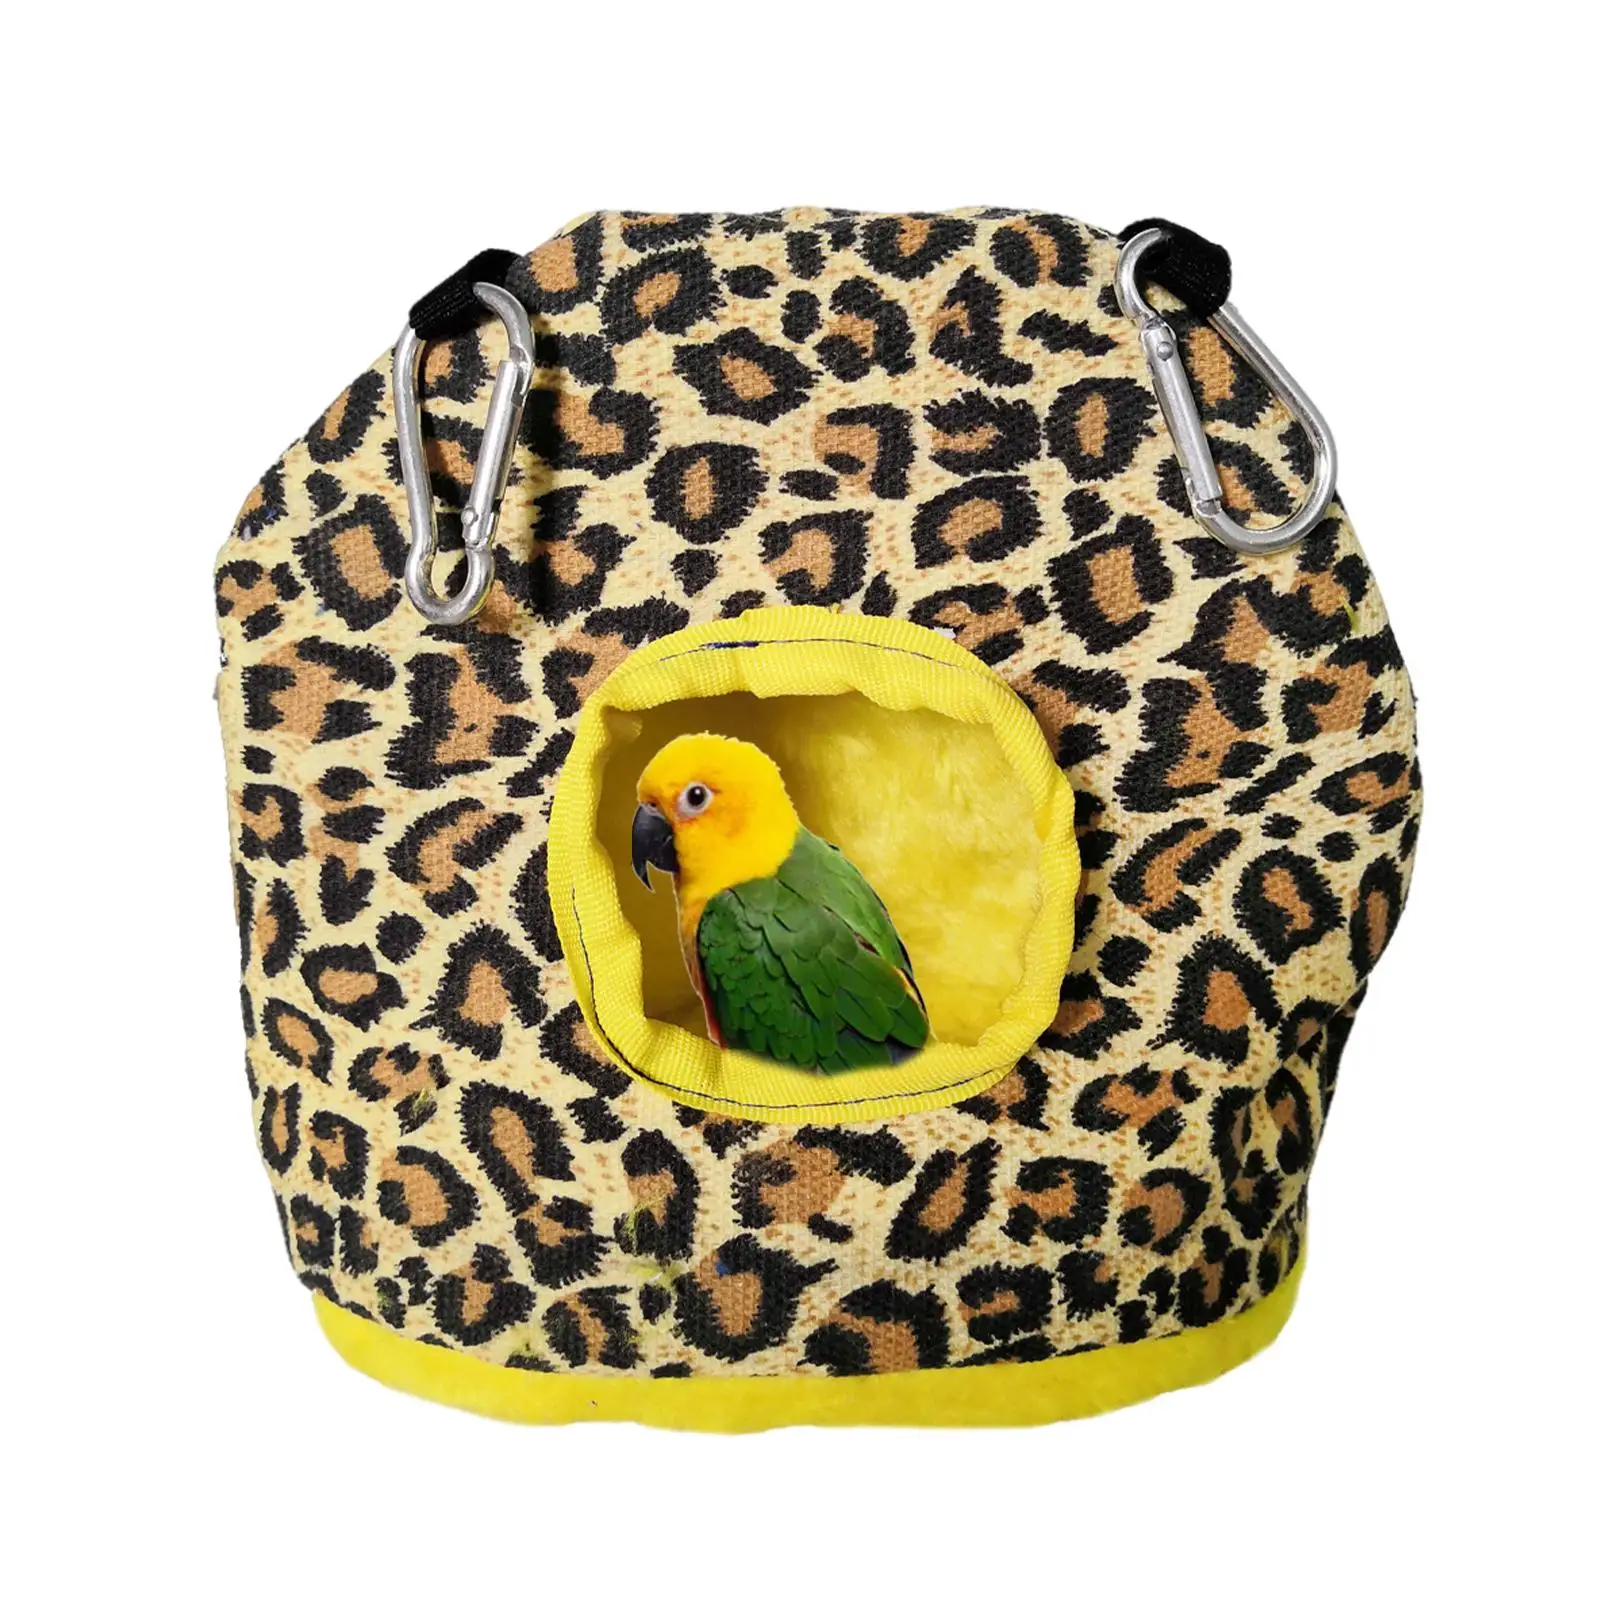 Warm Hanging Nest Sleeping Bed Swing Toys Cave Cage Plush House Tent Birds Hammock for Parakeet Cockatoo Rats Mouse Pet Supplies